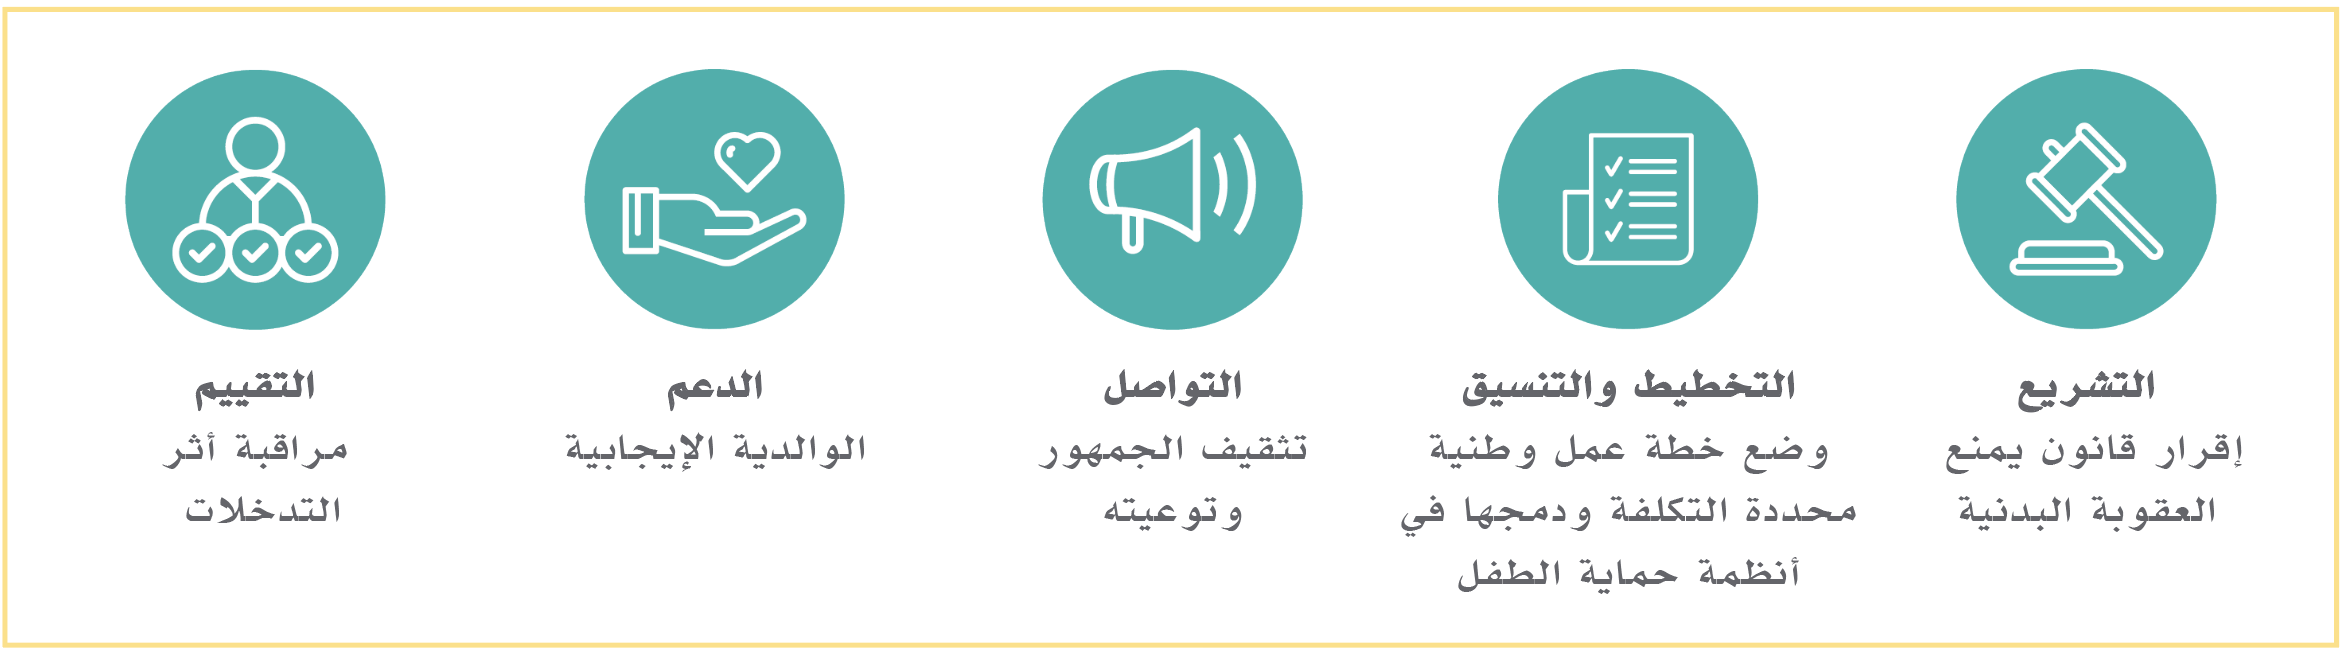 The key steps for moving from prohibition to elimination of corporal punishment Arabic